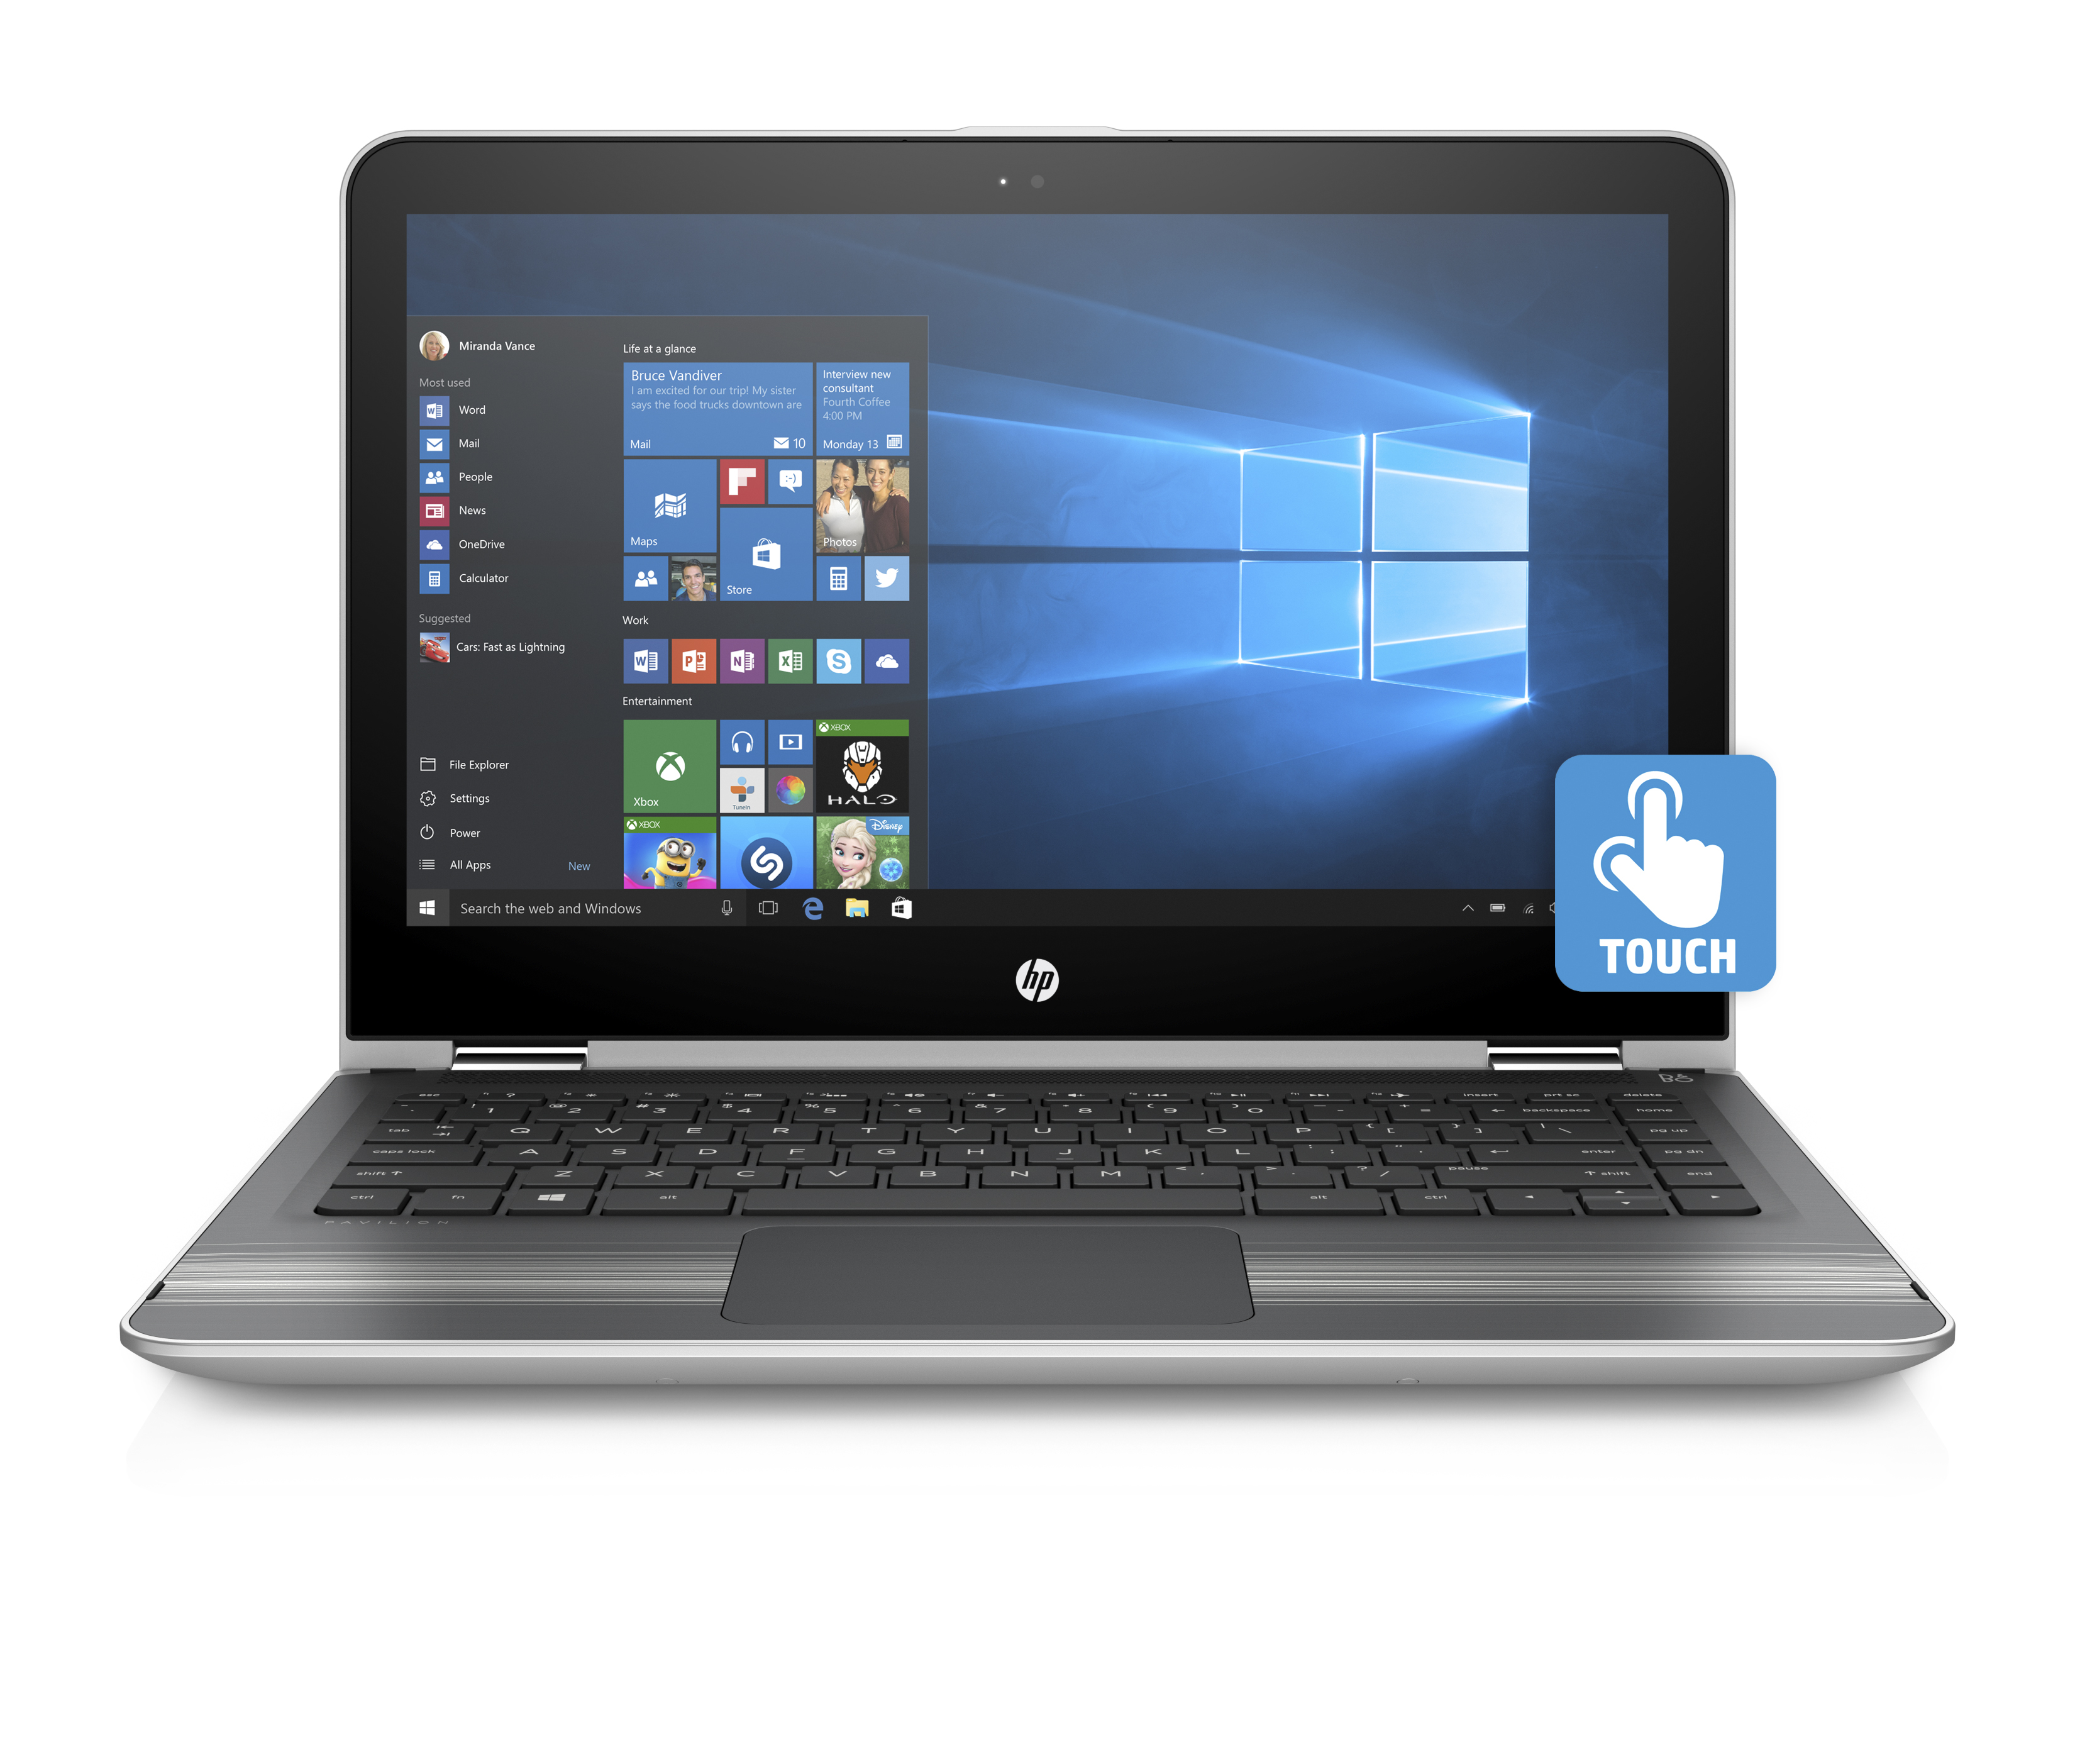 The HP Pavilion x360 with Windows 10